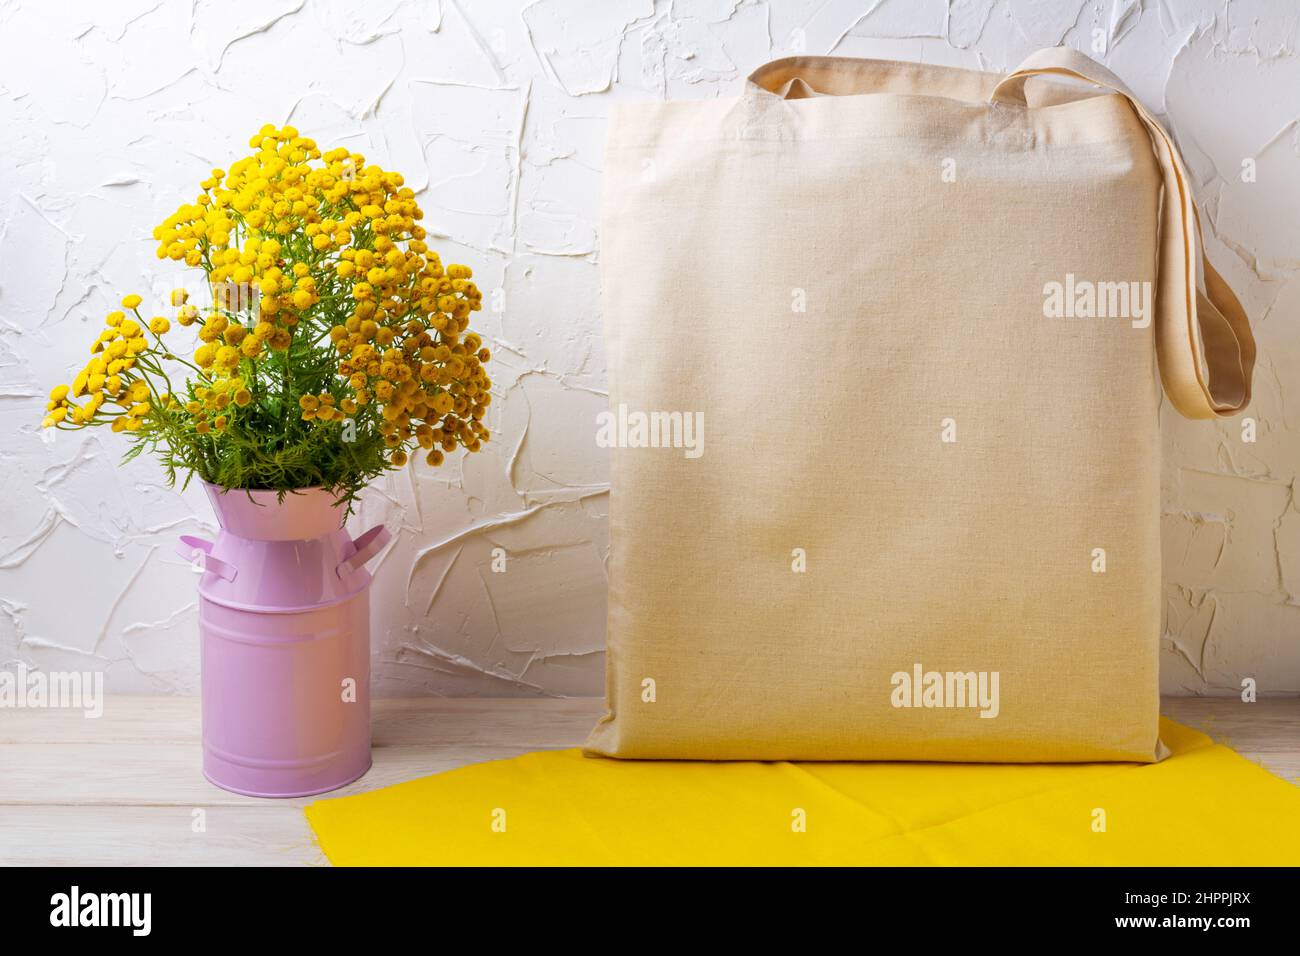 Canvas tote bag mockup with wild yellow flowers in the pink can and napkin. Rustic linen shopper bag mock up for branding presentation Stock Photo